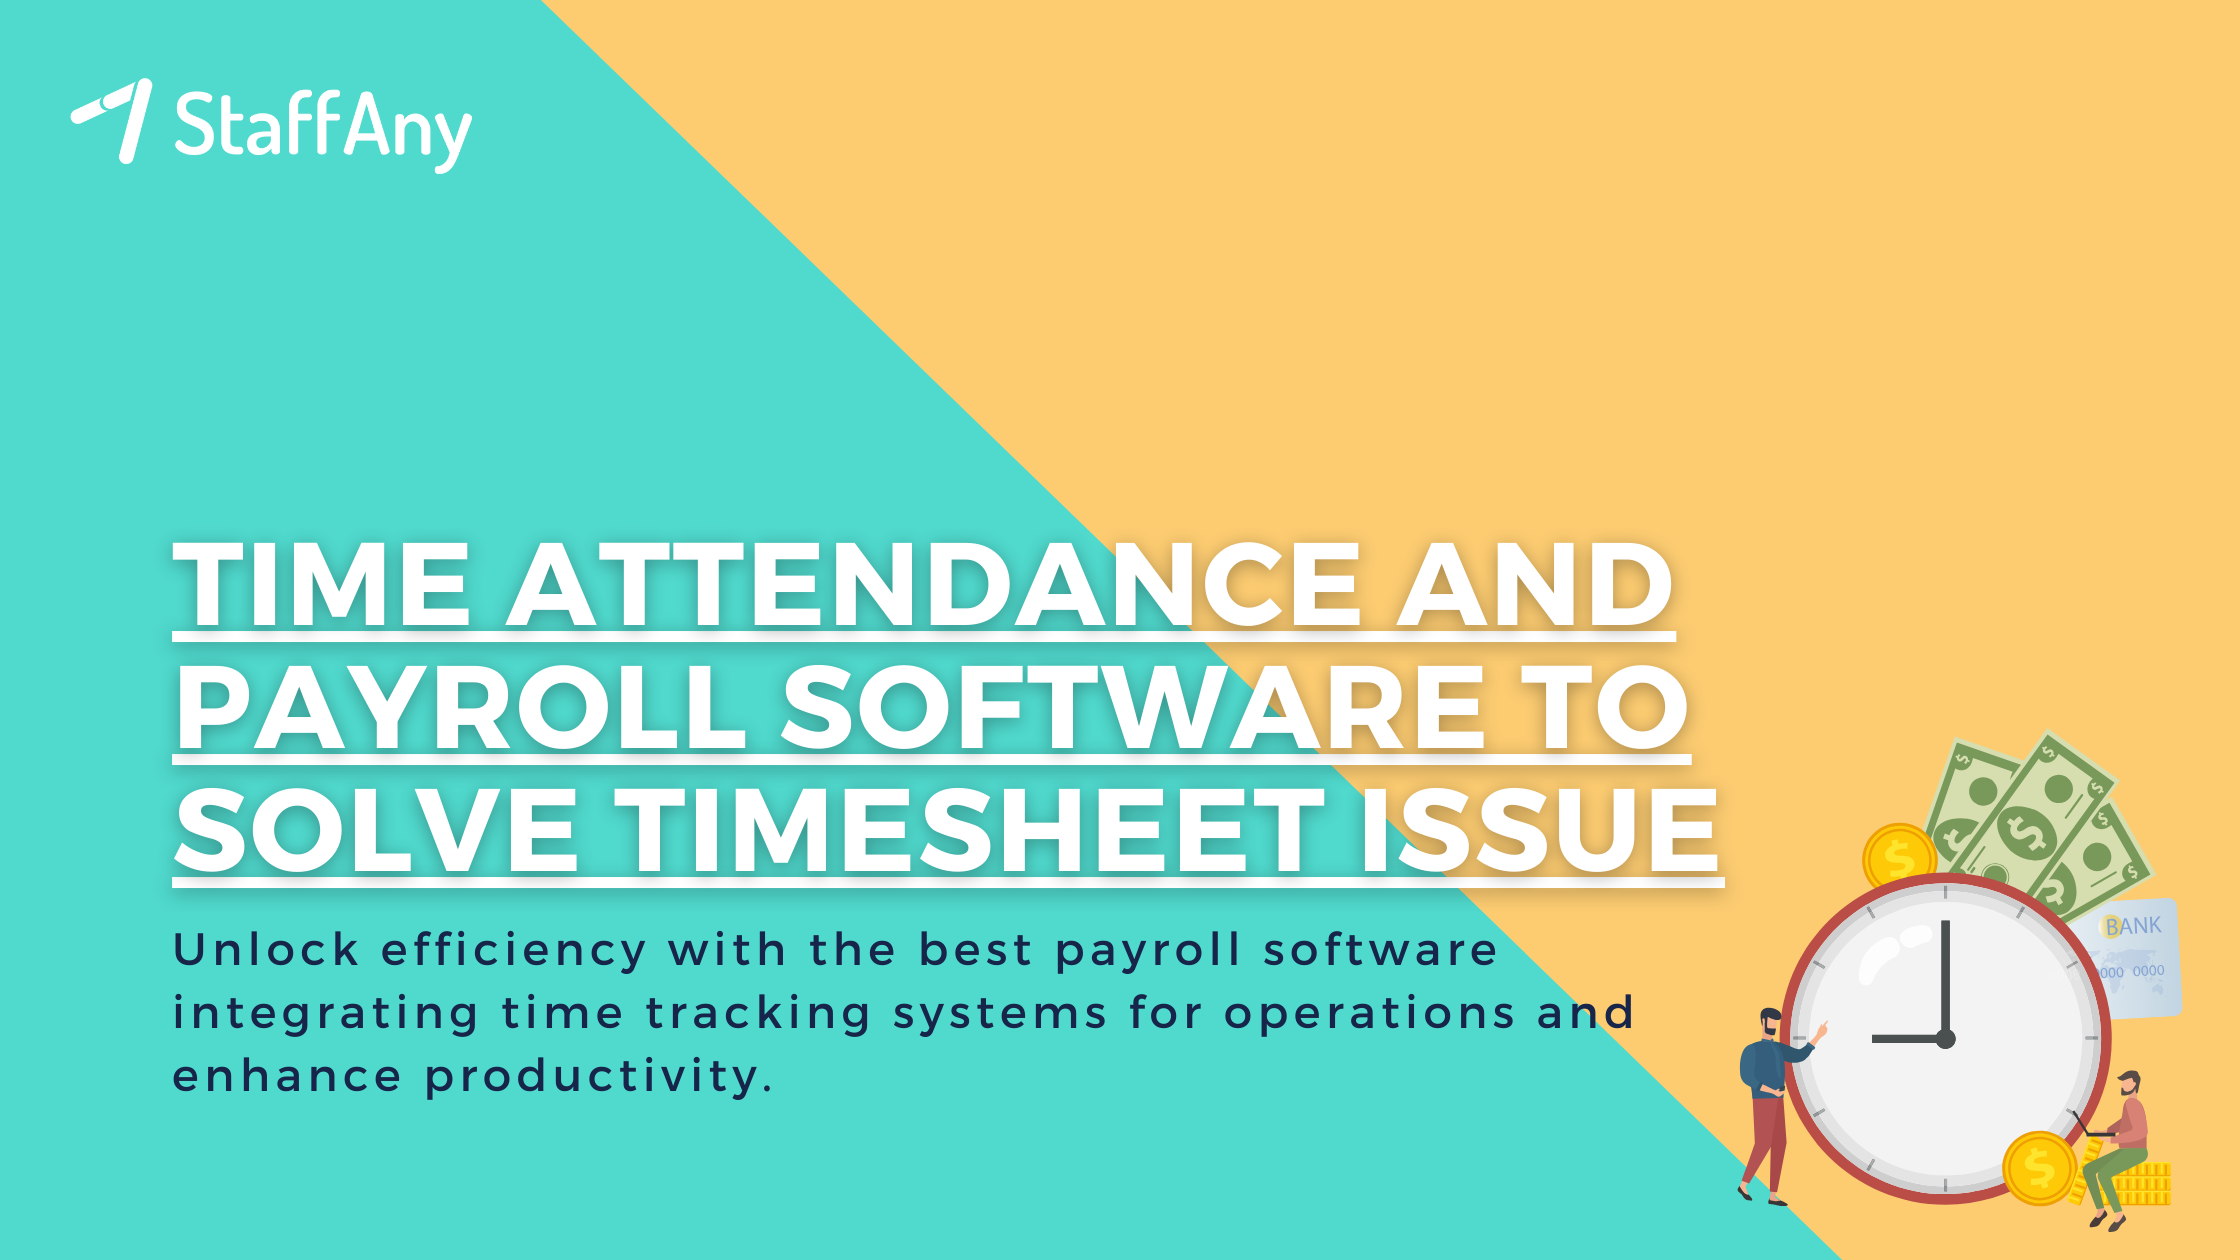 Time Attendance and Payroll Software to Solve Timesheet Issue